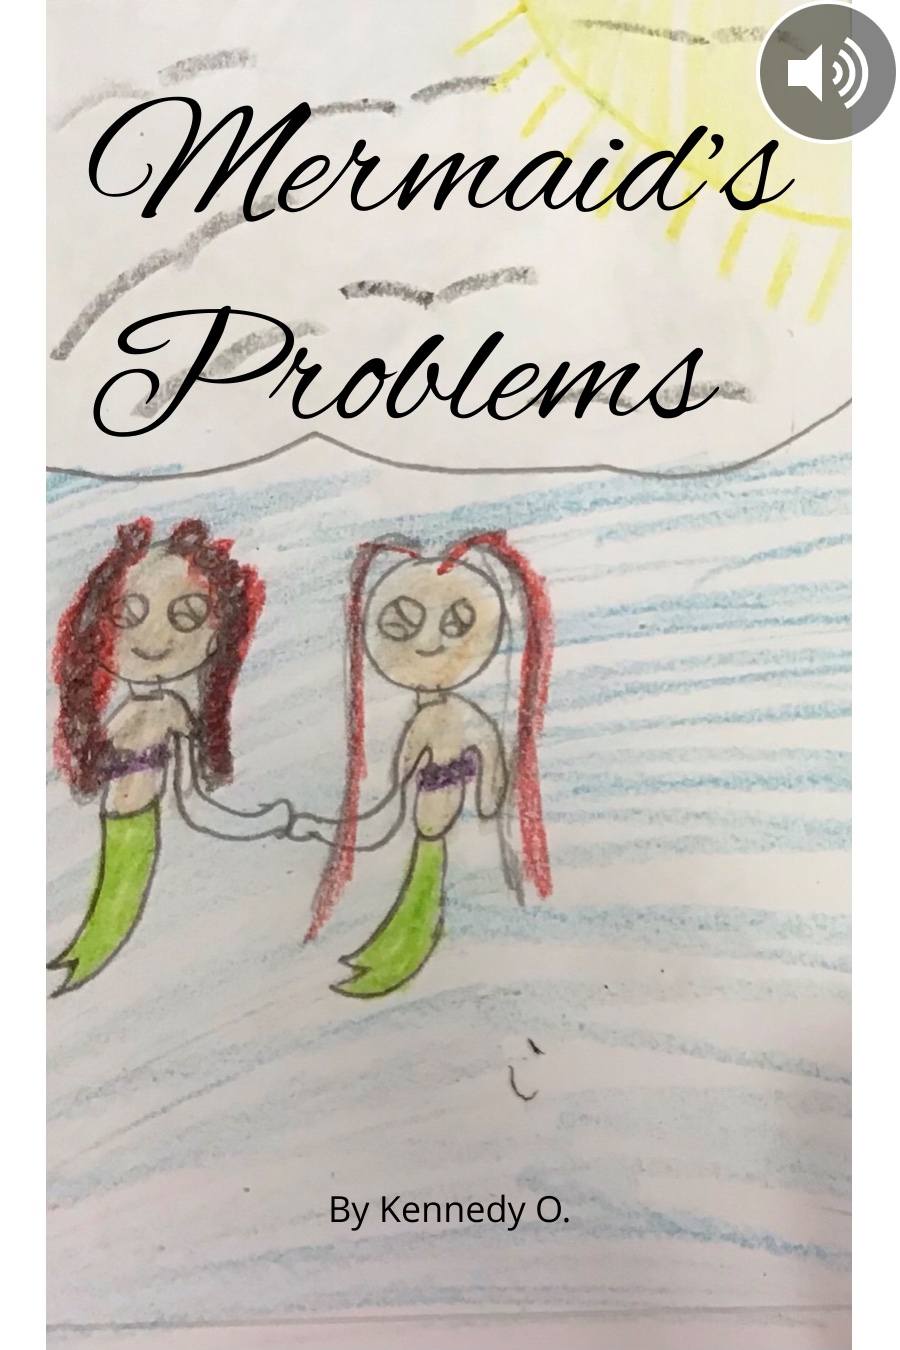 The Mermaids Problems by Kennedy O